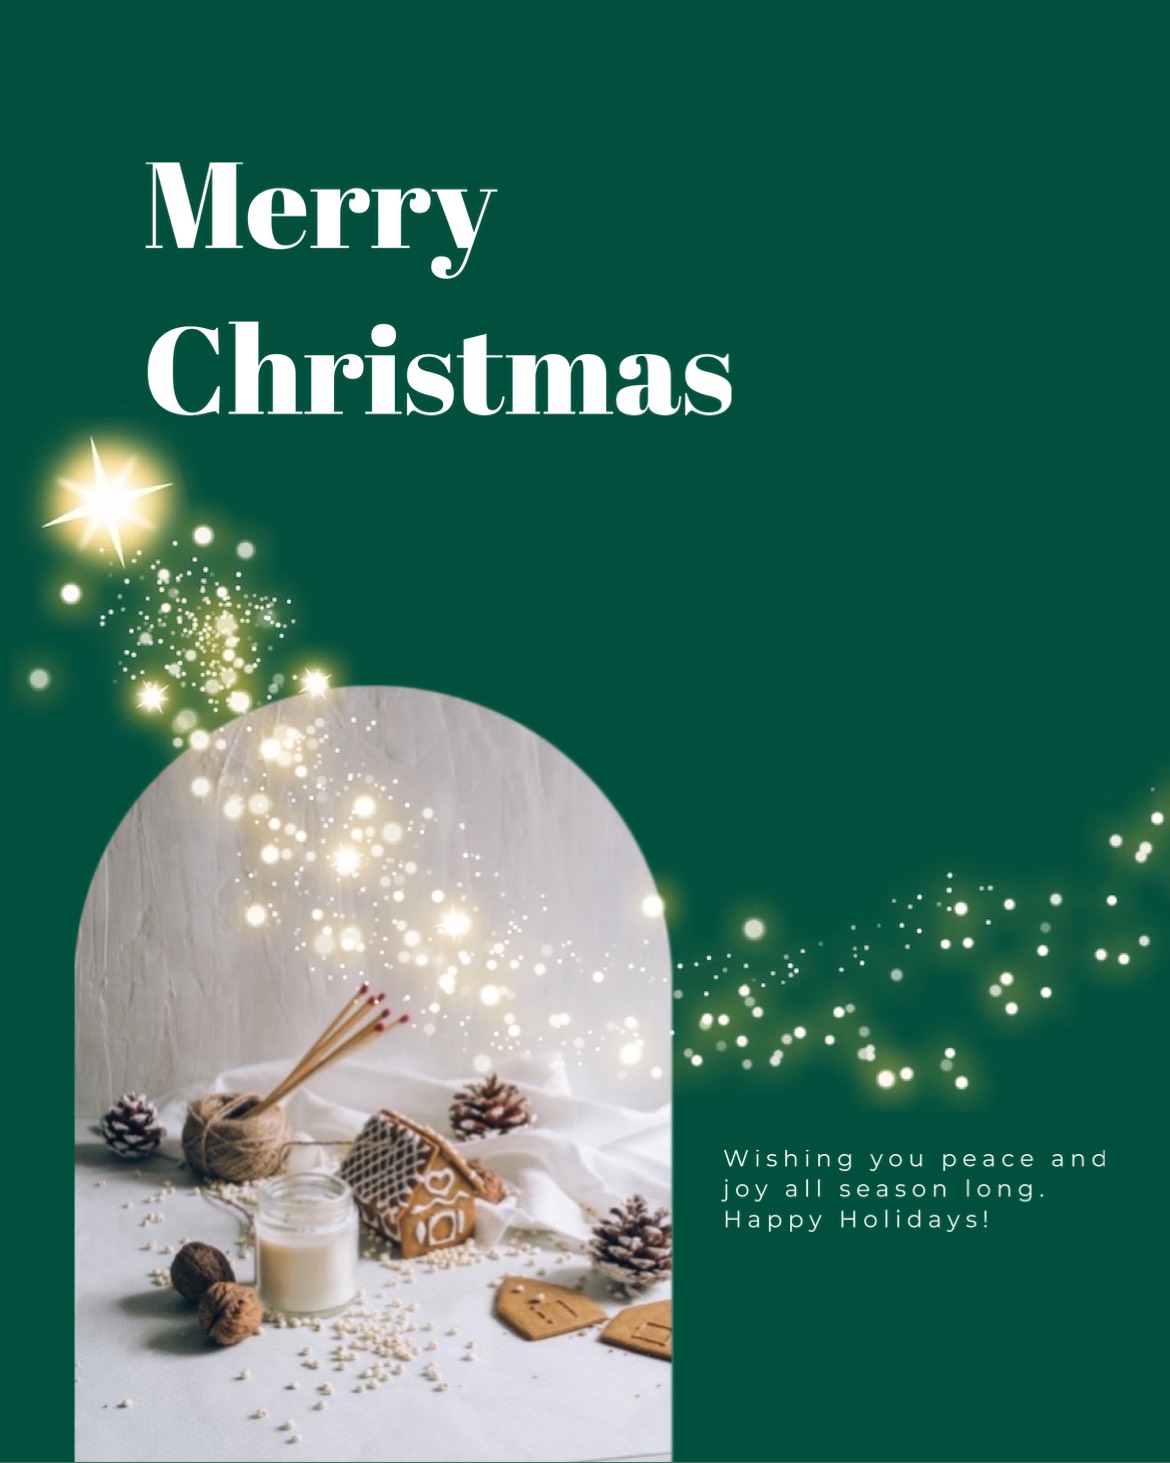 A Christmas Card With A Green Background And A Candle Merry Christmas Template